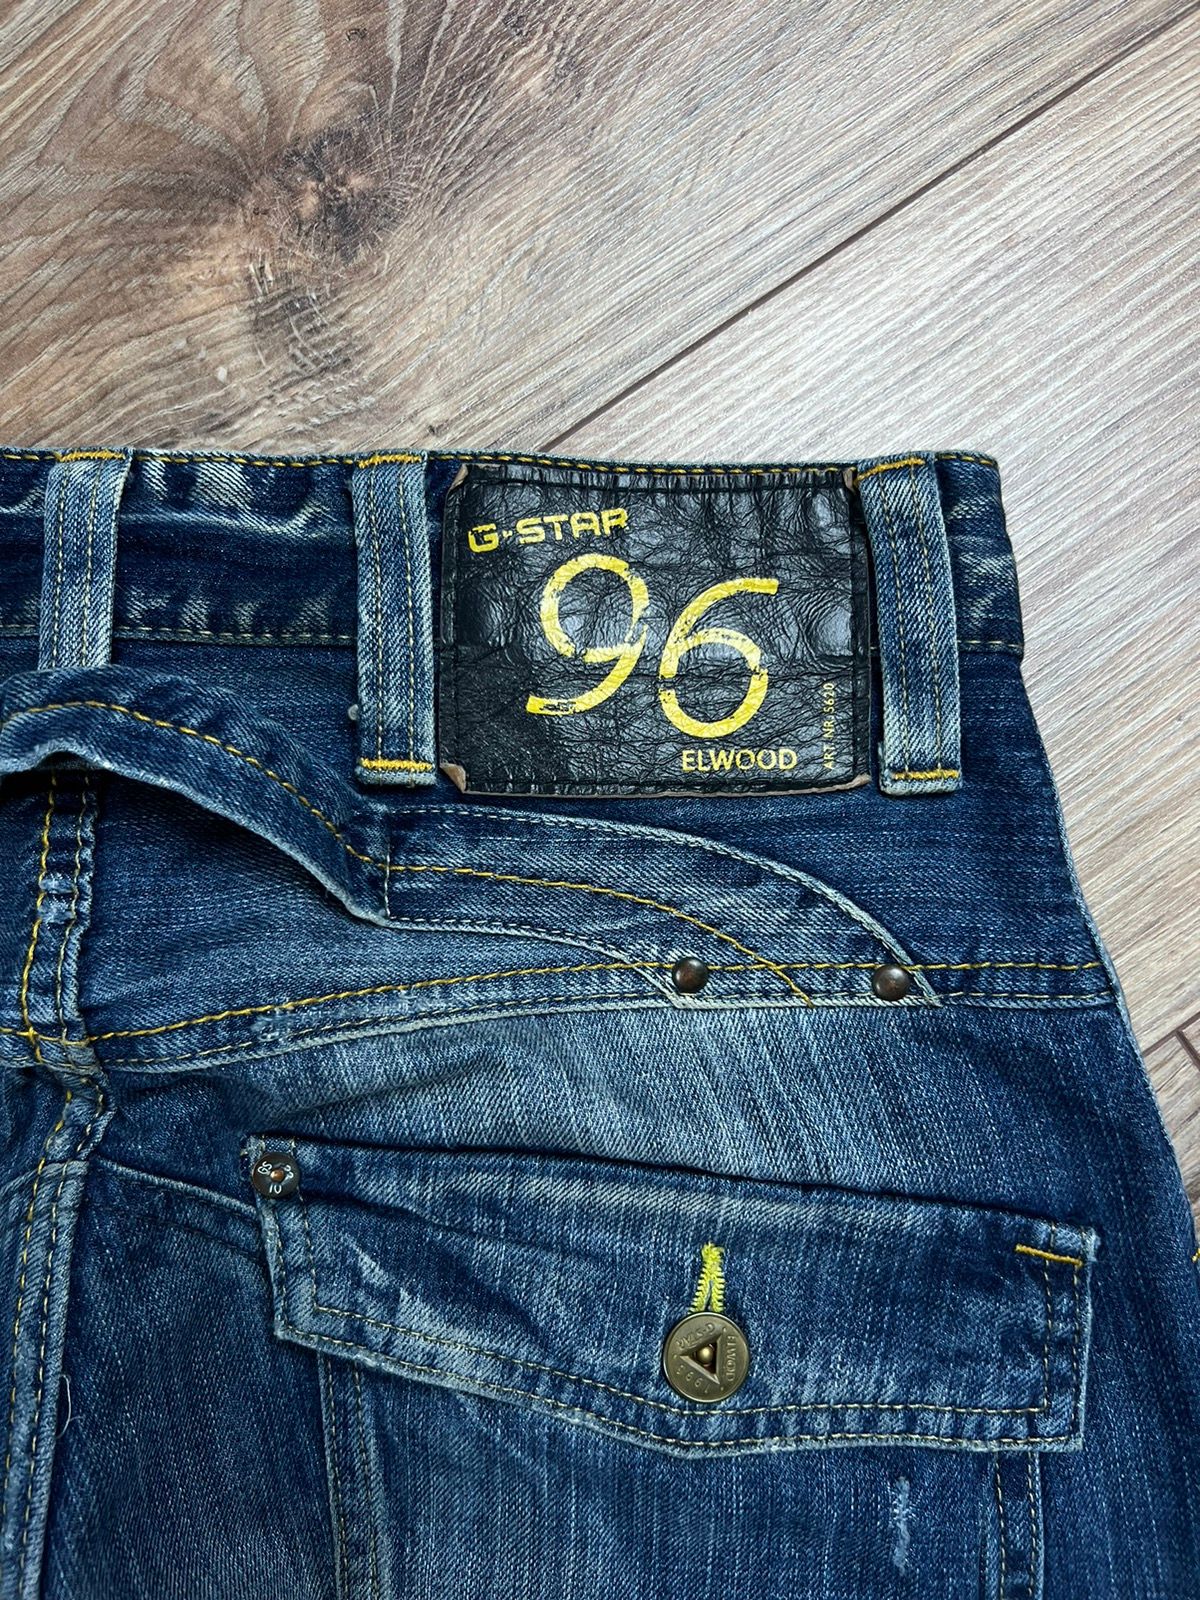 Vintage 💫 90’S G-STAR RAW VINTAGE DOUBLE KNEE OPIUM WASHED JEANS Size US 30 / EU 46 - 5 Thumbnail